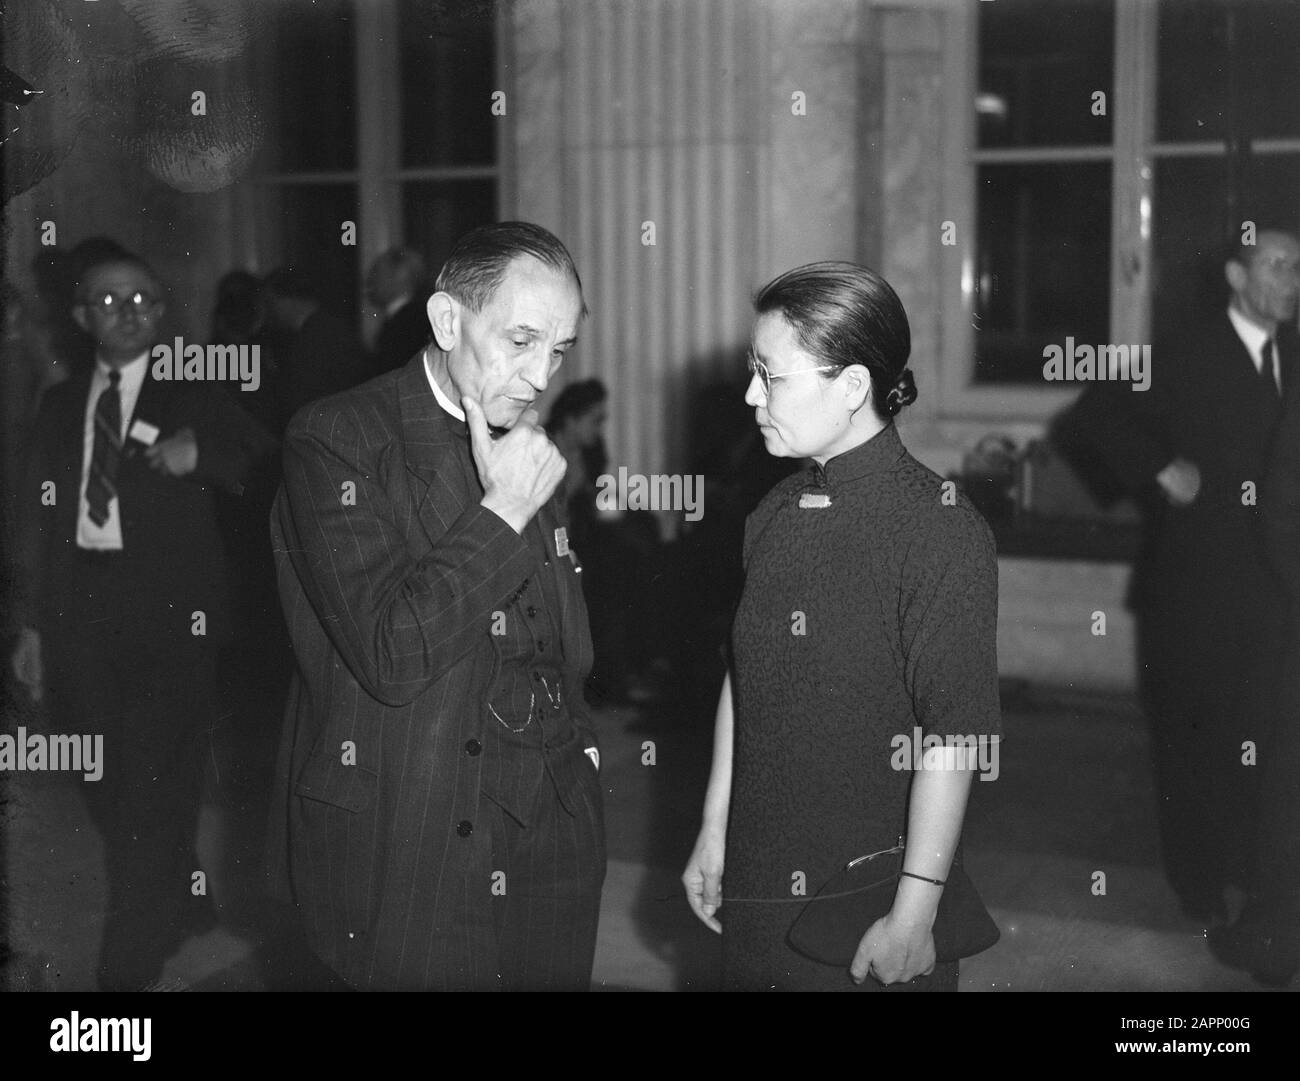 World Council of Church Congress. Reverend Niemoller in conversation with Chinese lady Date: August 27, 1948 Keywords: conversations Stock Photo